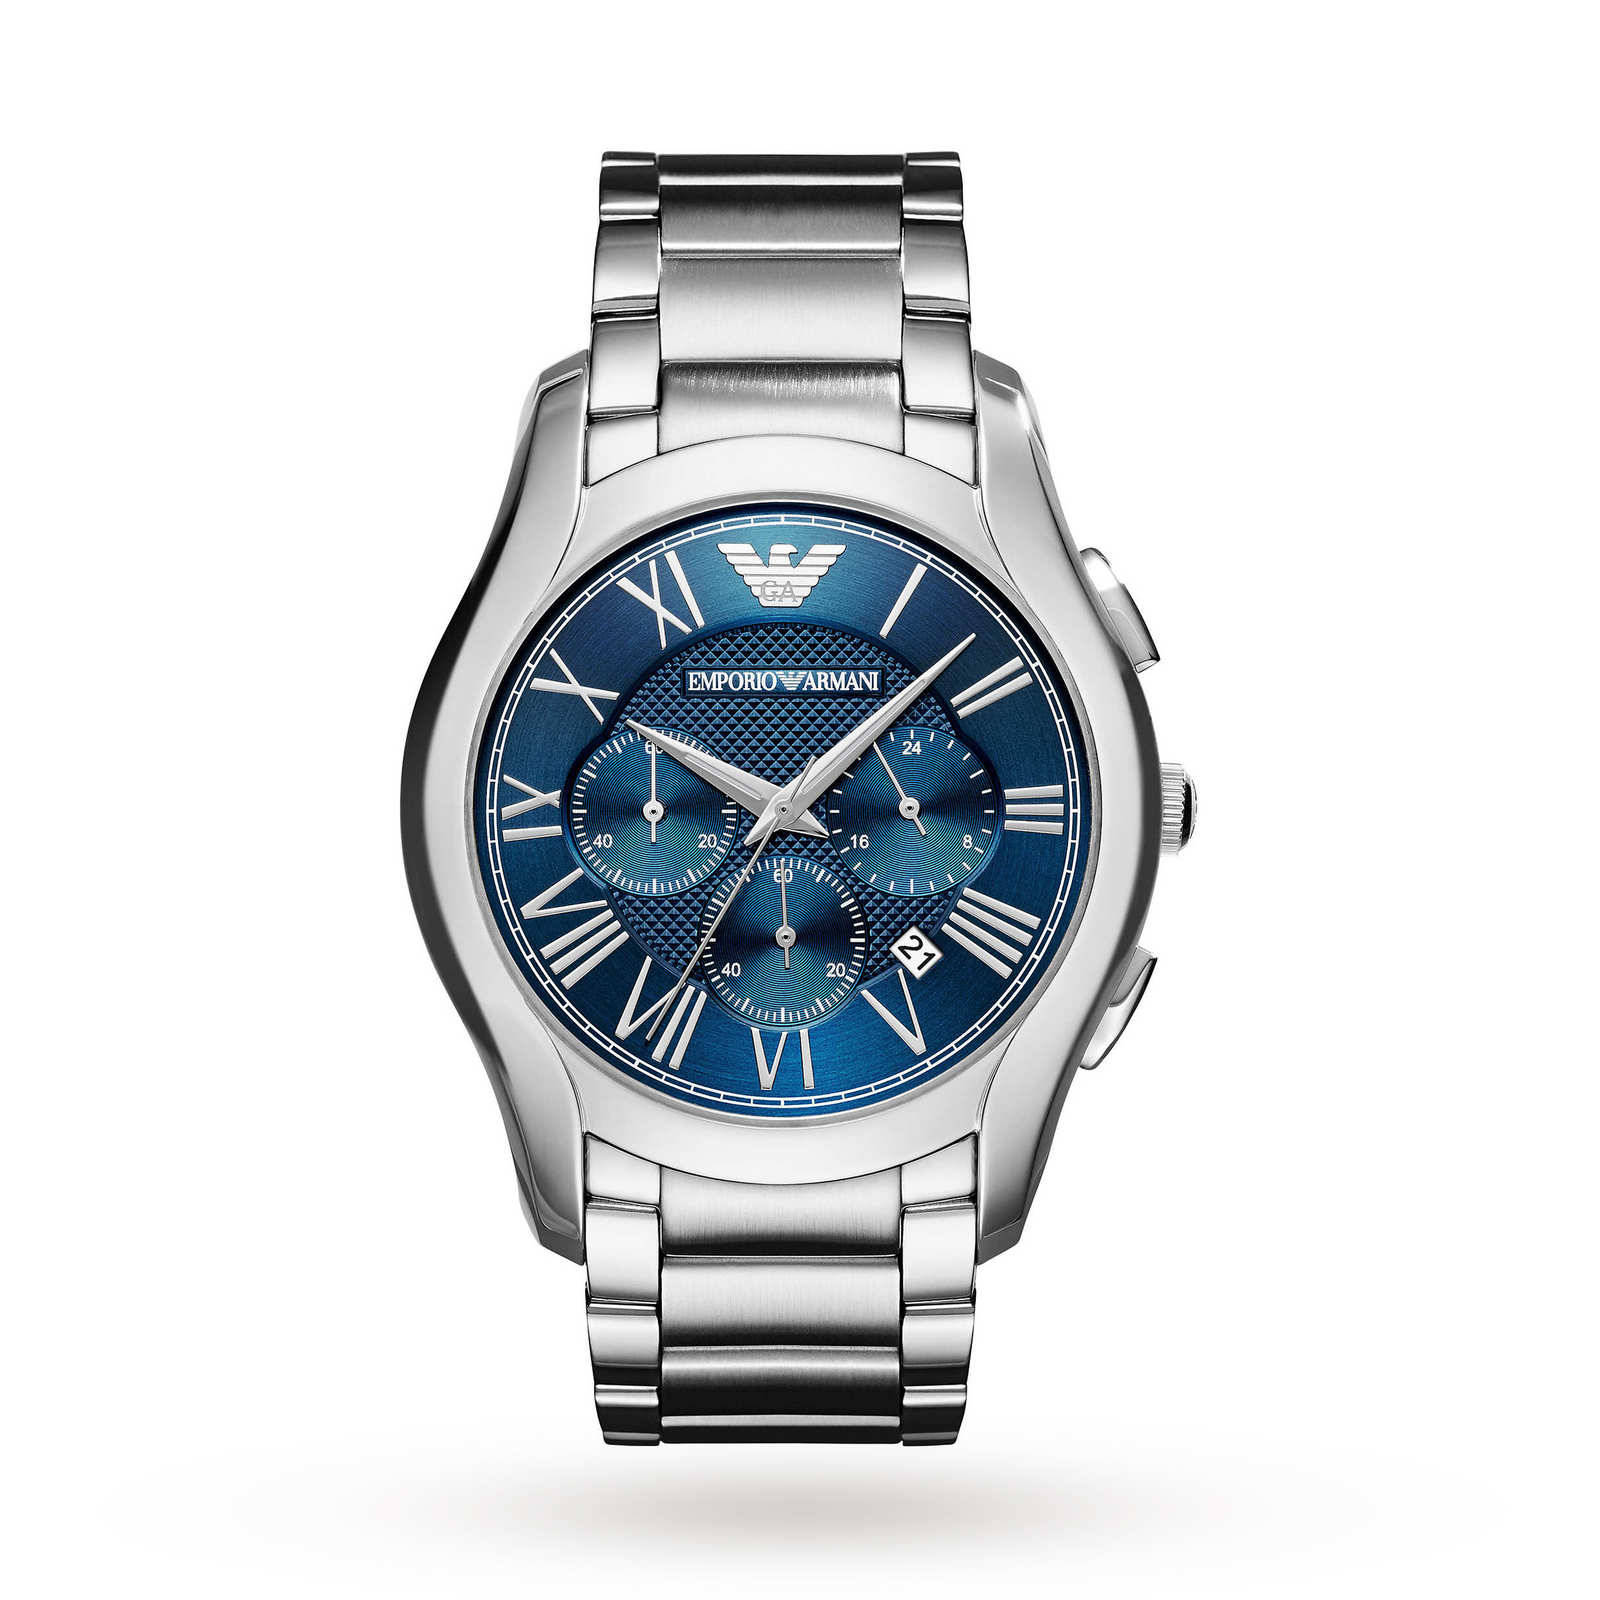 Emporio Armani Watch Battery Replacement Cost Hot Sale, SAVE 60%.